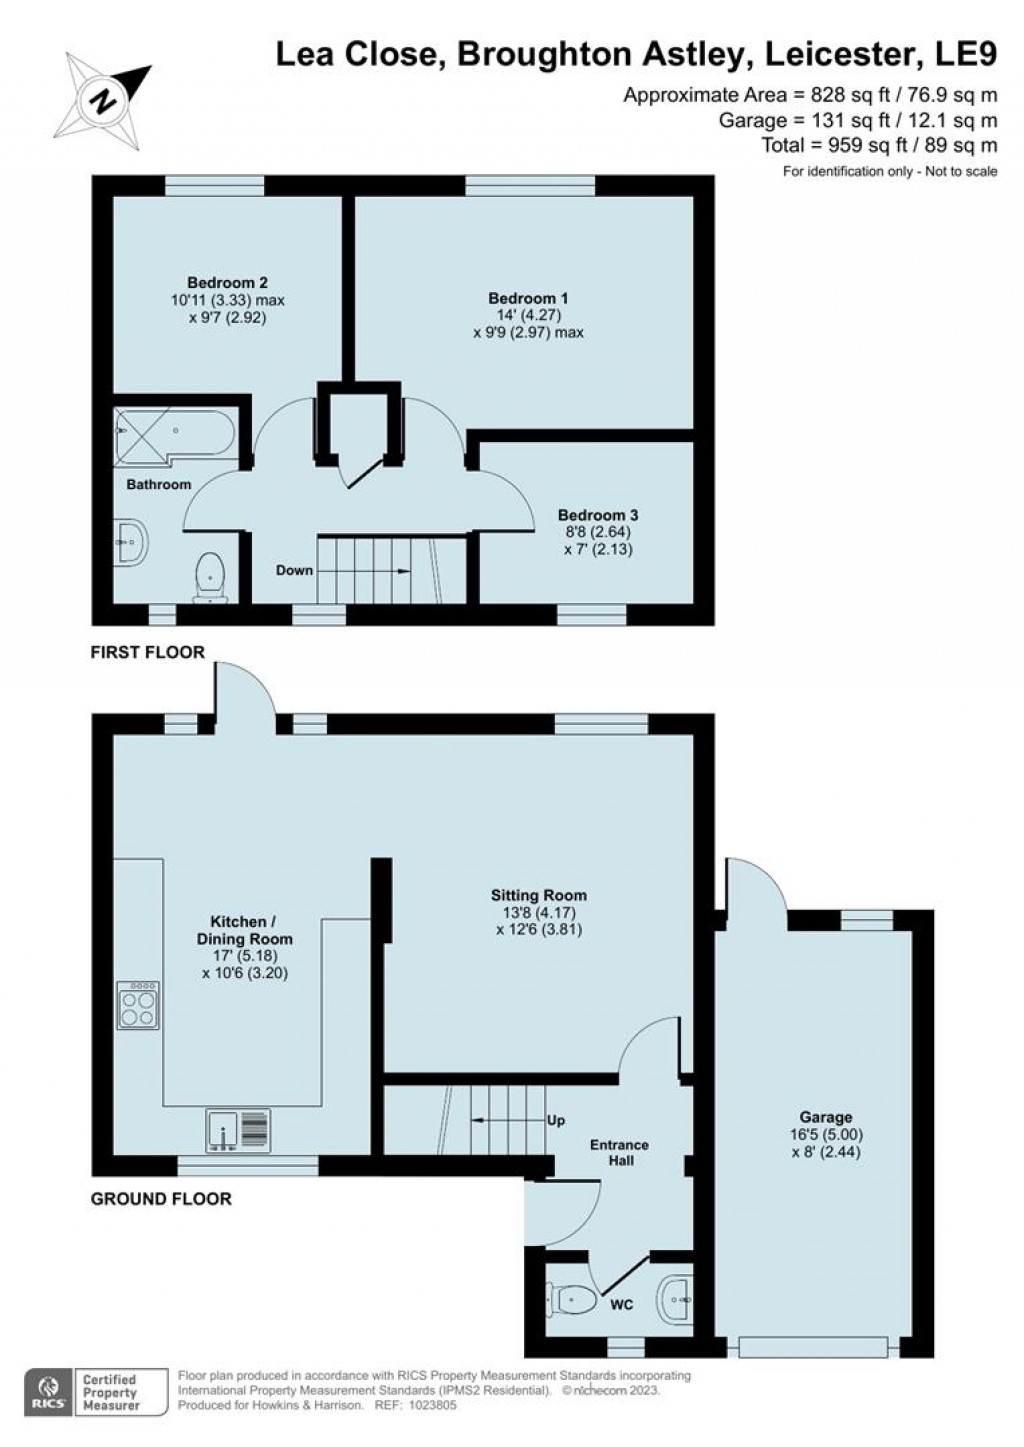 Floorplans For Lea Close, Broughton Astley, Leicester